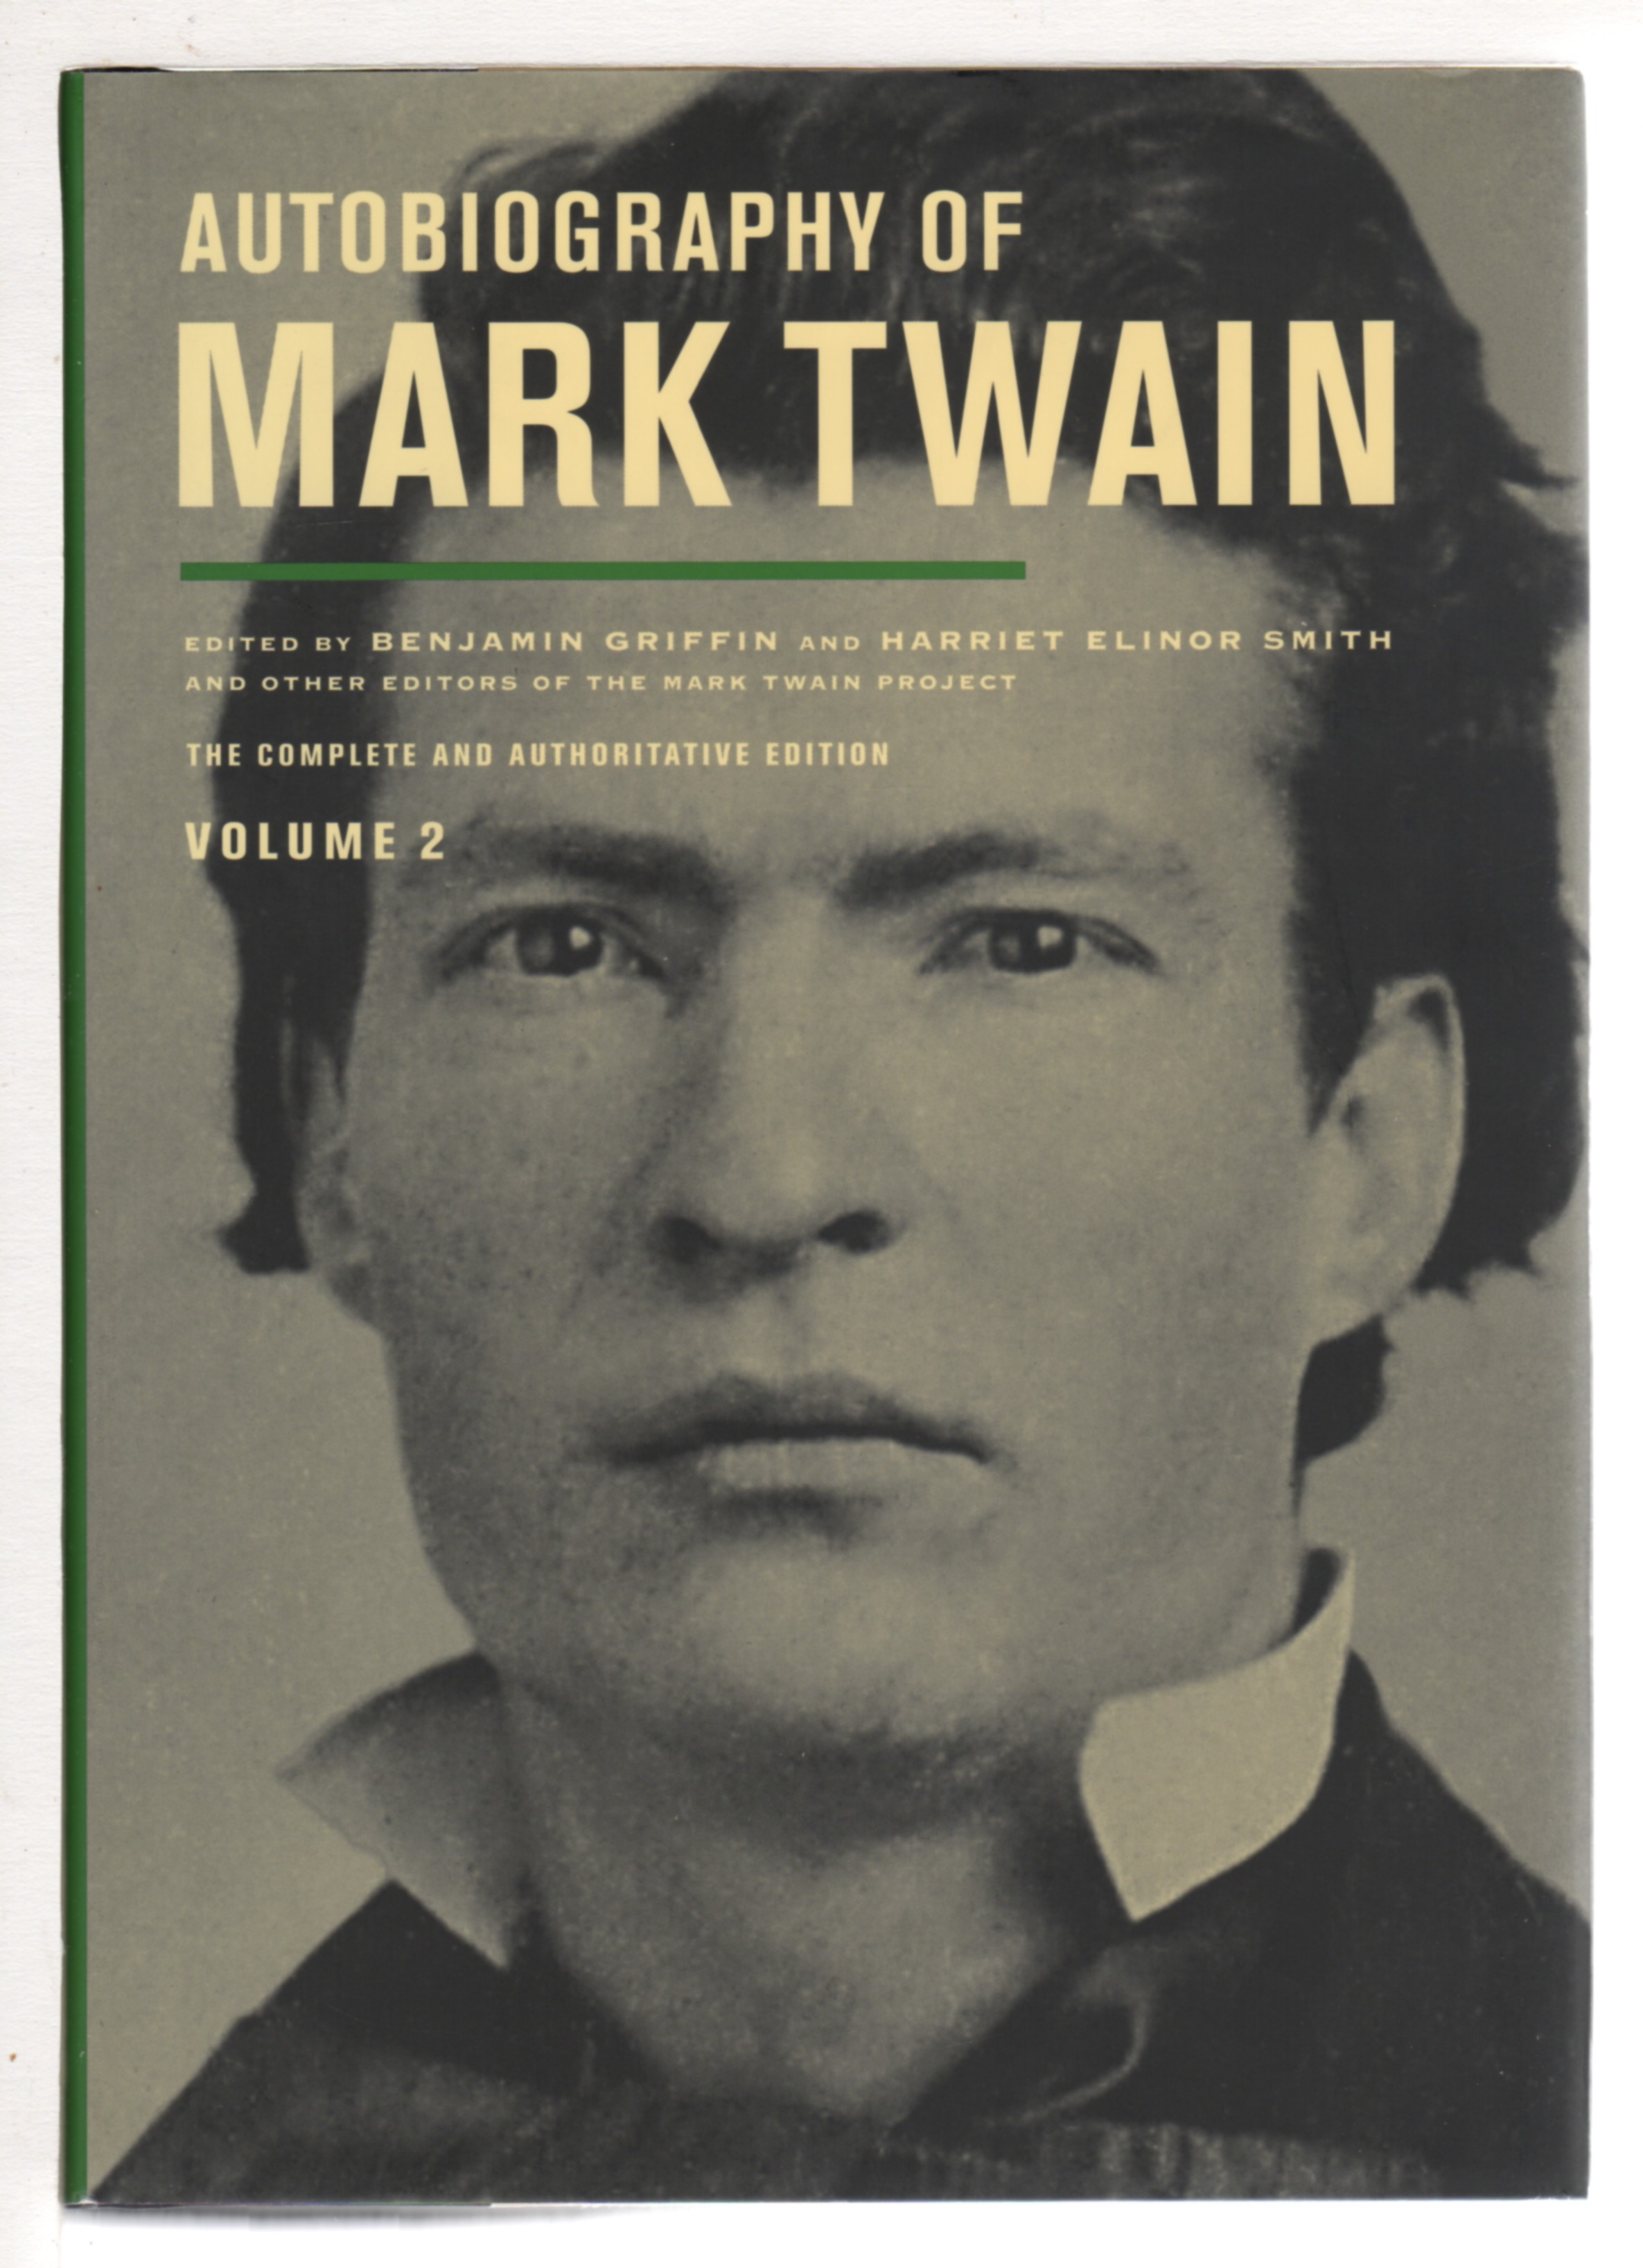 AUTOBIOGRAPHY OF MARK TWAIN: The Complete and Authoritative Edition, Volume 1. - Twain, Mark (Samuel L. Clemens, 1835-1910 ); Benjamin Griffin and Harriet E. Smith, editors with associate editors Victor Fischer, Michael B. Frank, Sharon K. Goetz, and Leslie Diane Myrick.